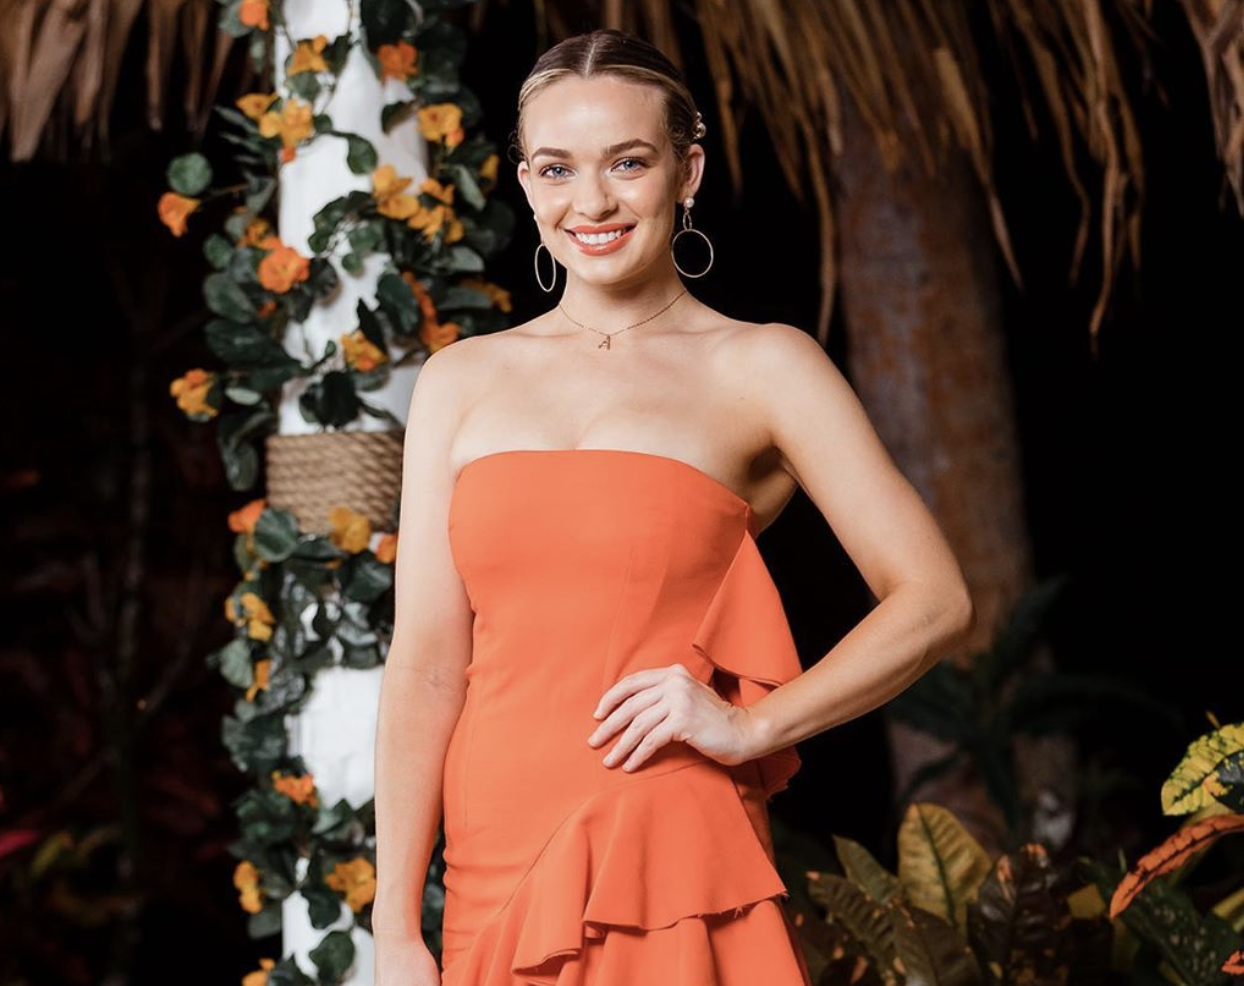 Bachelor In Paradise’s Abbie Opens Up About Ongoing Slut-Shaming